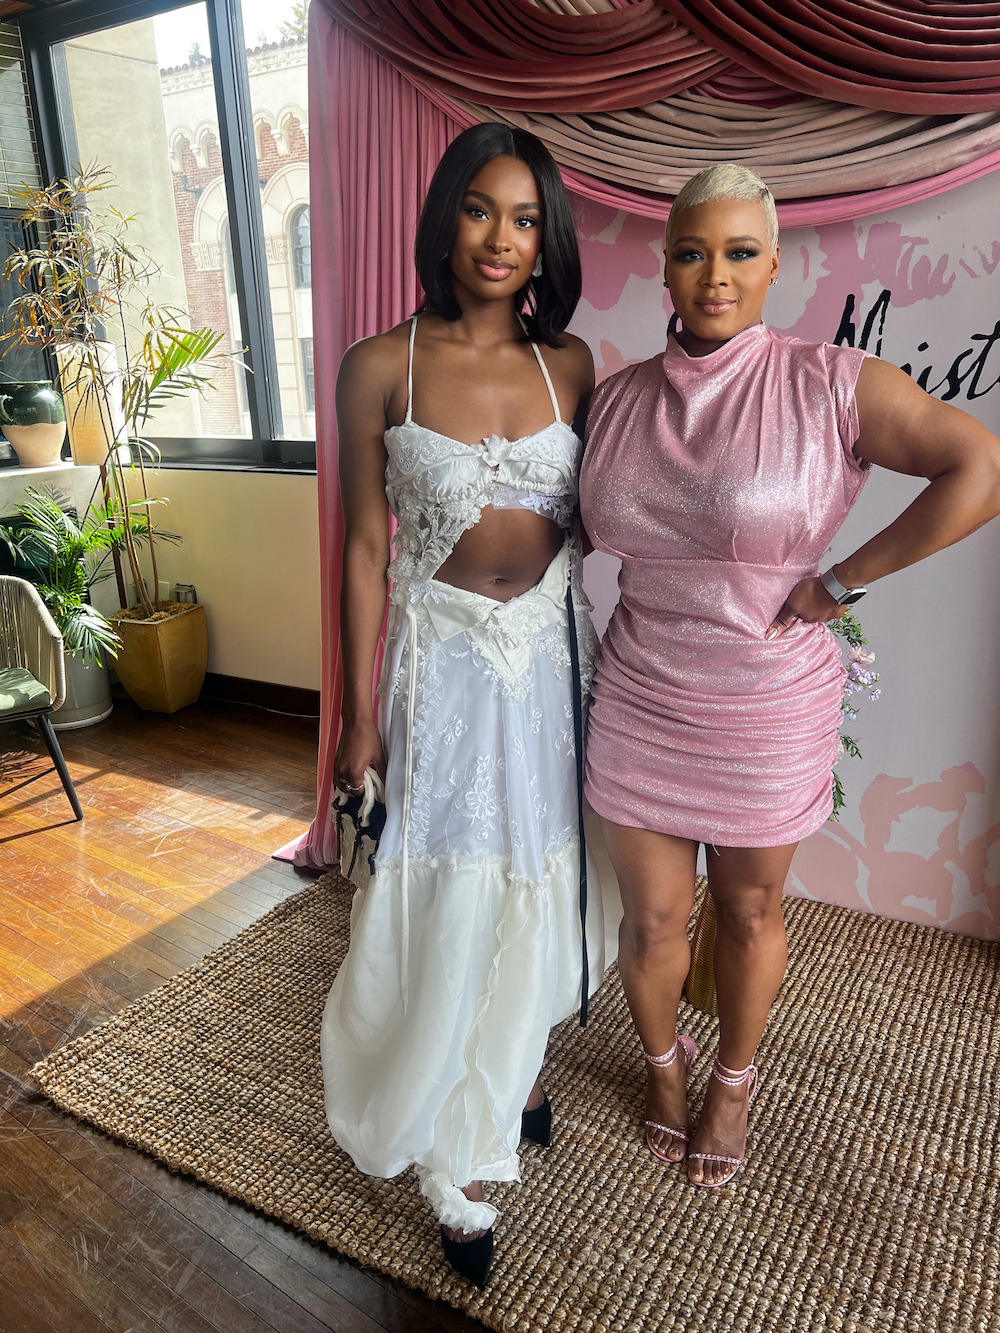 89899 8 claire sulmers Claires Life Shea Moistures Shea in Bloom Deodorant Launch with Coco Jones Makeup Shayla and more 8